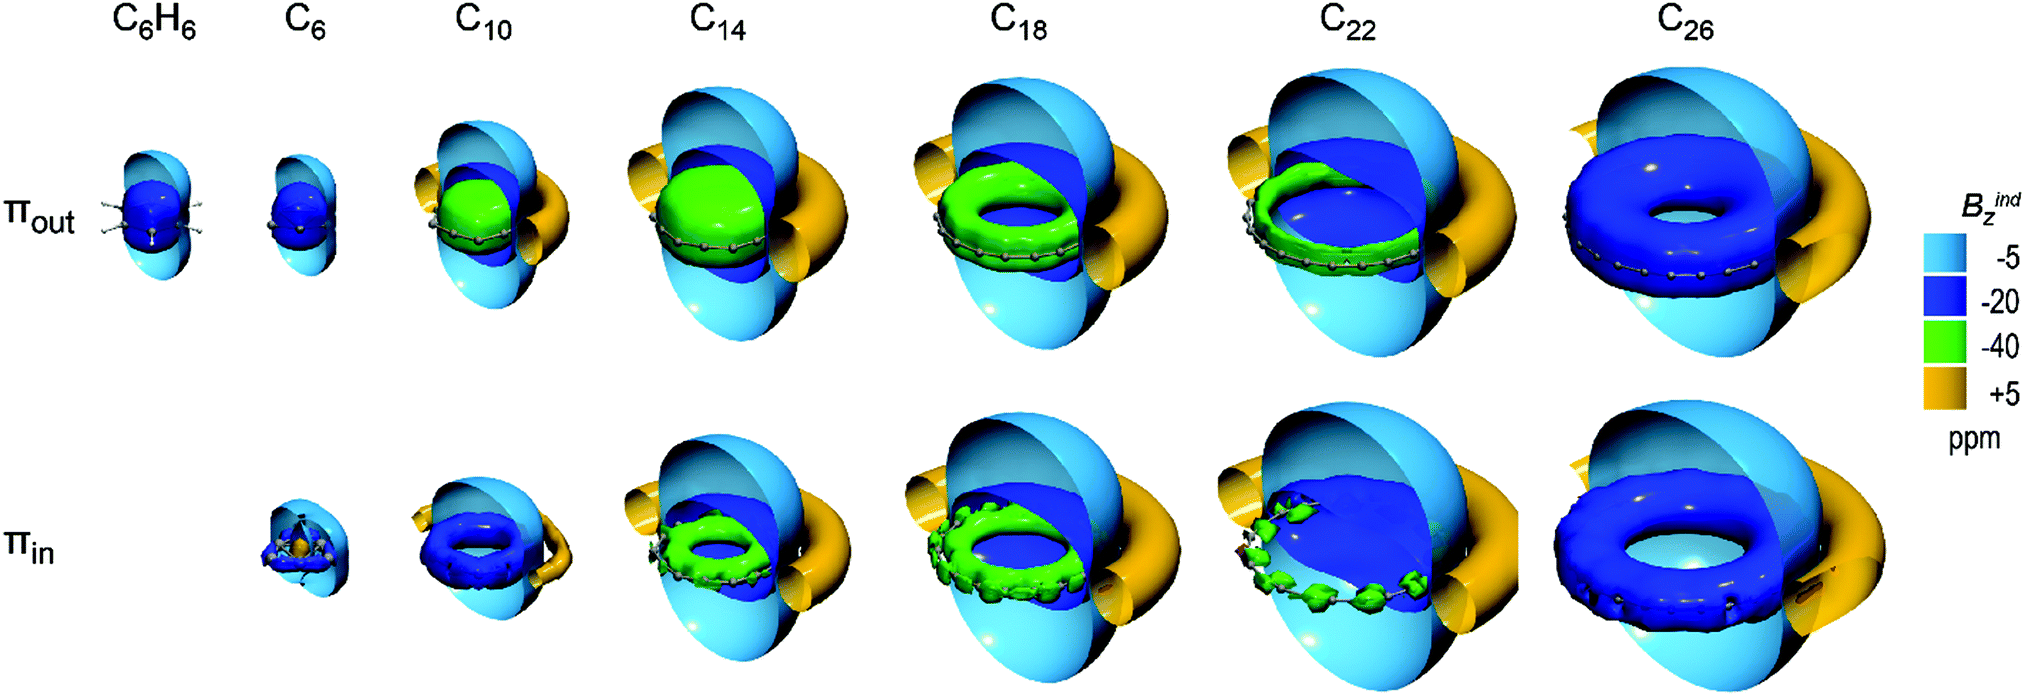 Induced Magnetic Field In Sp Hybridized Carbon Rings Analysis Of Double Aromaticity And Antiaromaticity In Cyclo 2 N Carbon Allotropes Physical Chemistry Chemical Physics Rsc Publishing Doi 10 1039 D0cpa